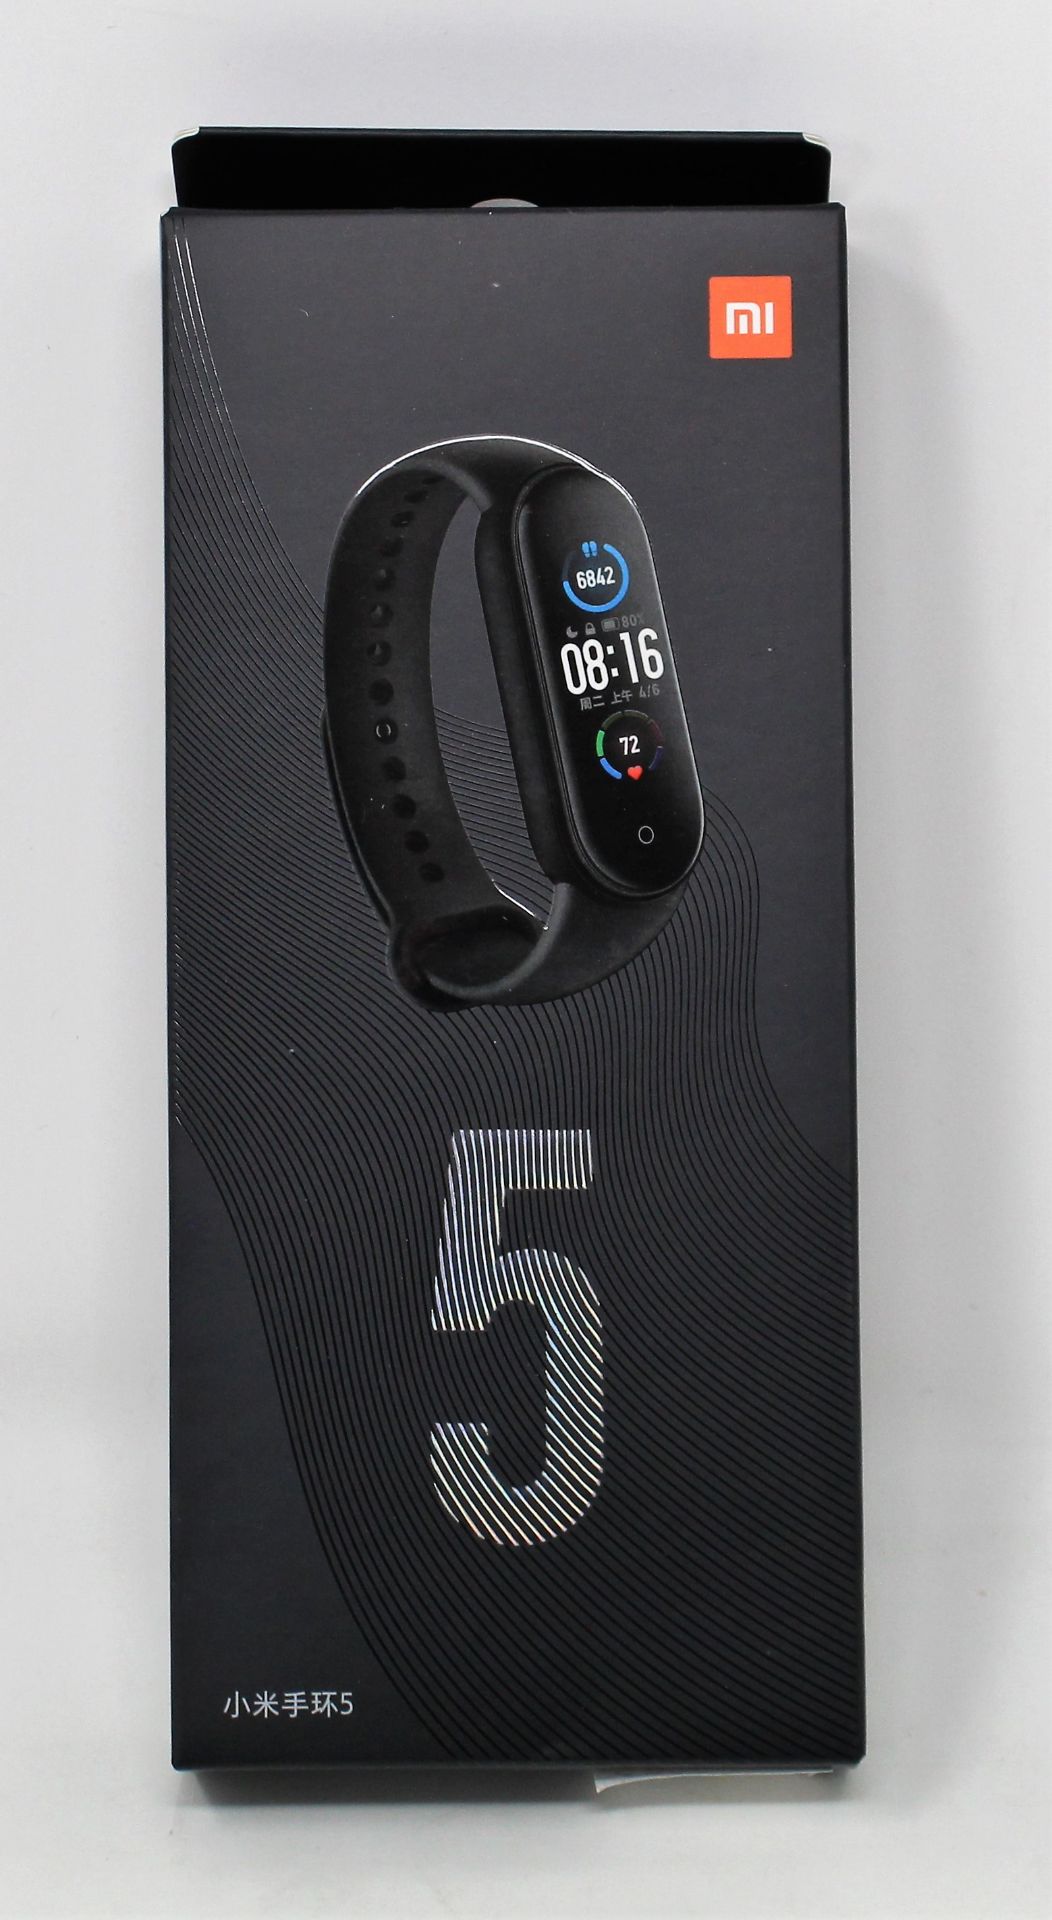 Five boxed as new Xiaomi Mi Band 5 Fitness Trackers in Black (Boxes sealed).